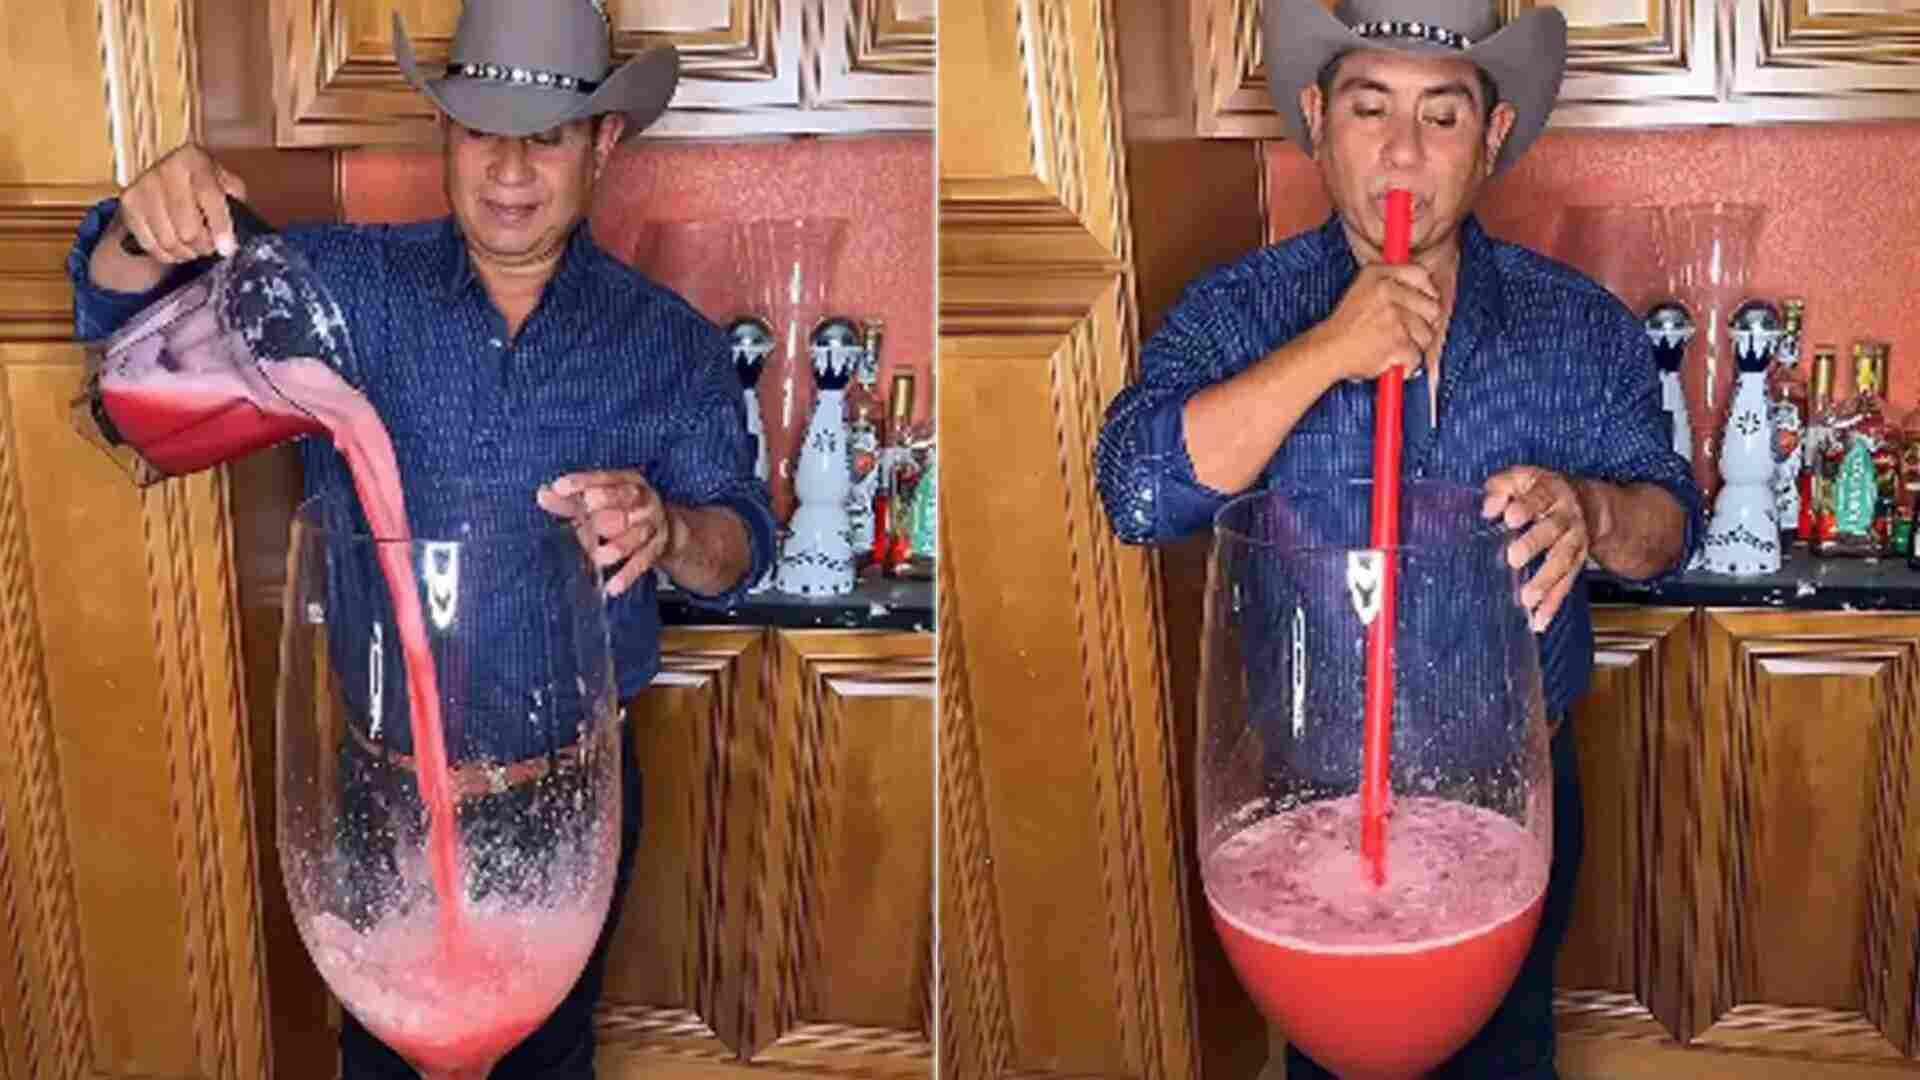 Mexican Man Serves Up Watermelon Cocktail In Giant Glass – Would You Try It?